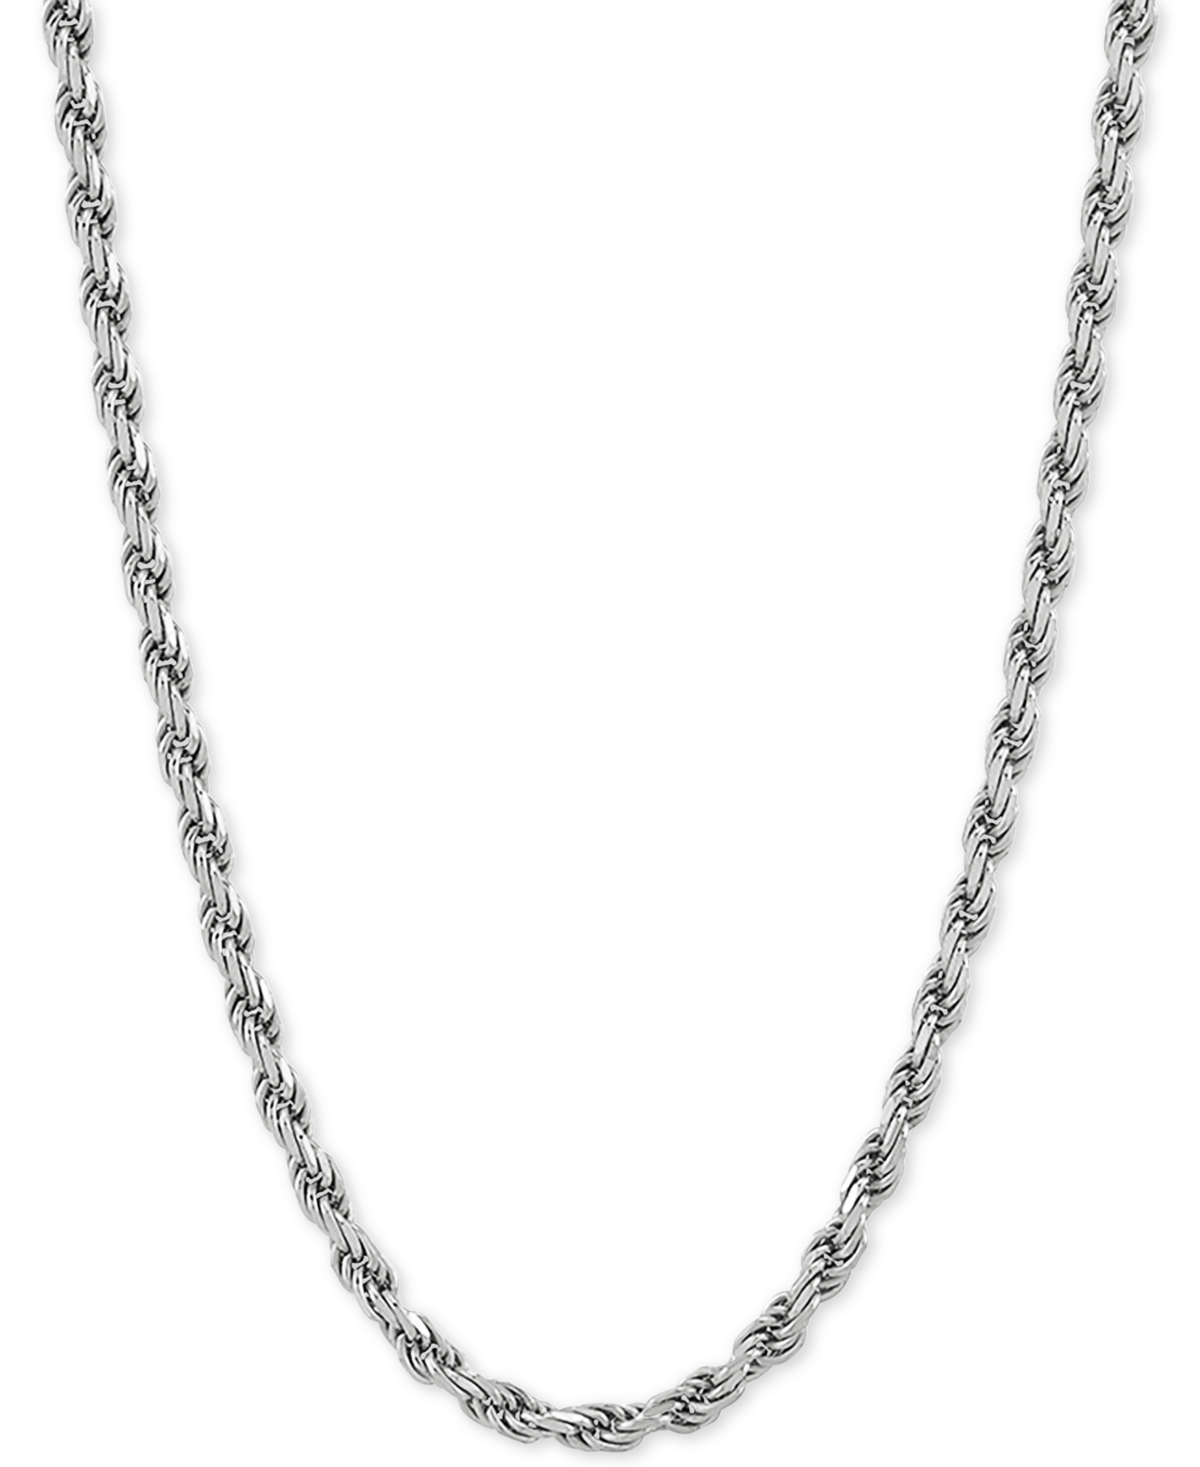 Rope Link 18" Chain Necklace in Sterling Silver - Silver